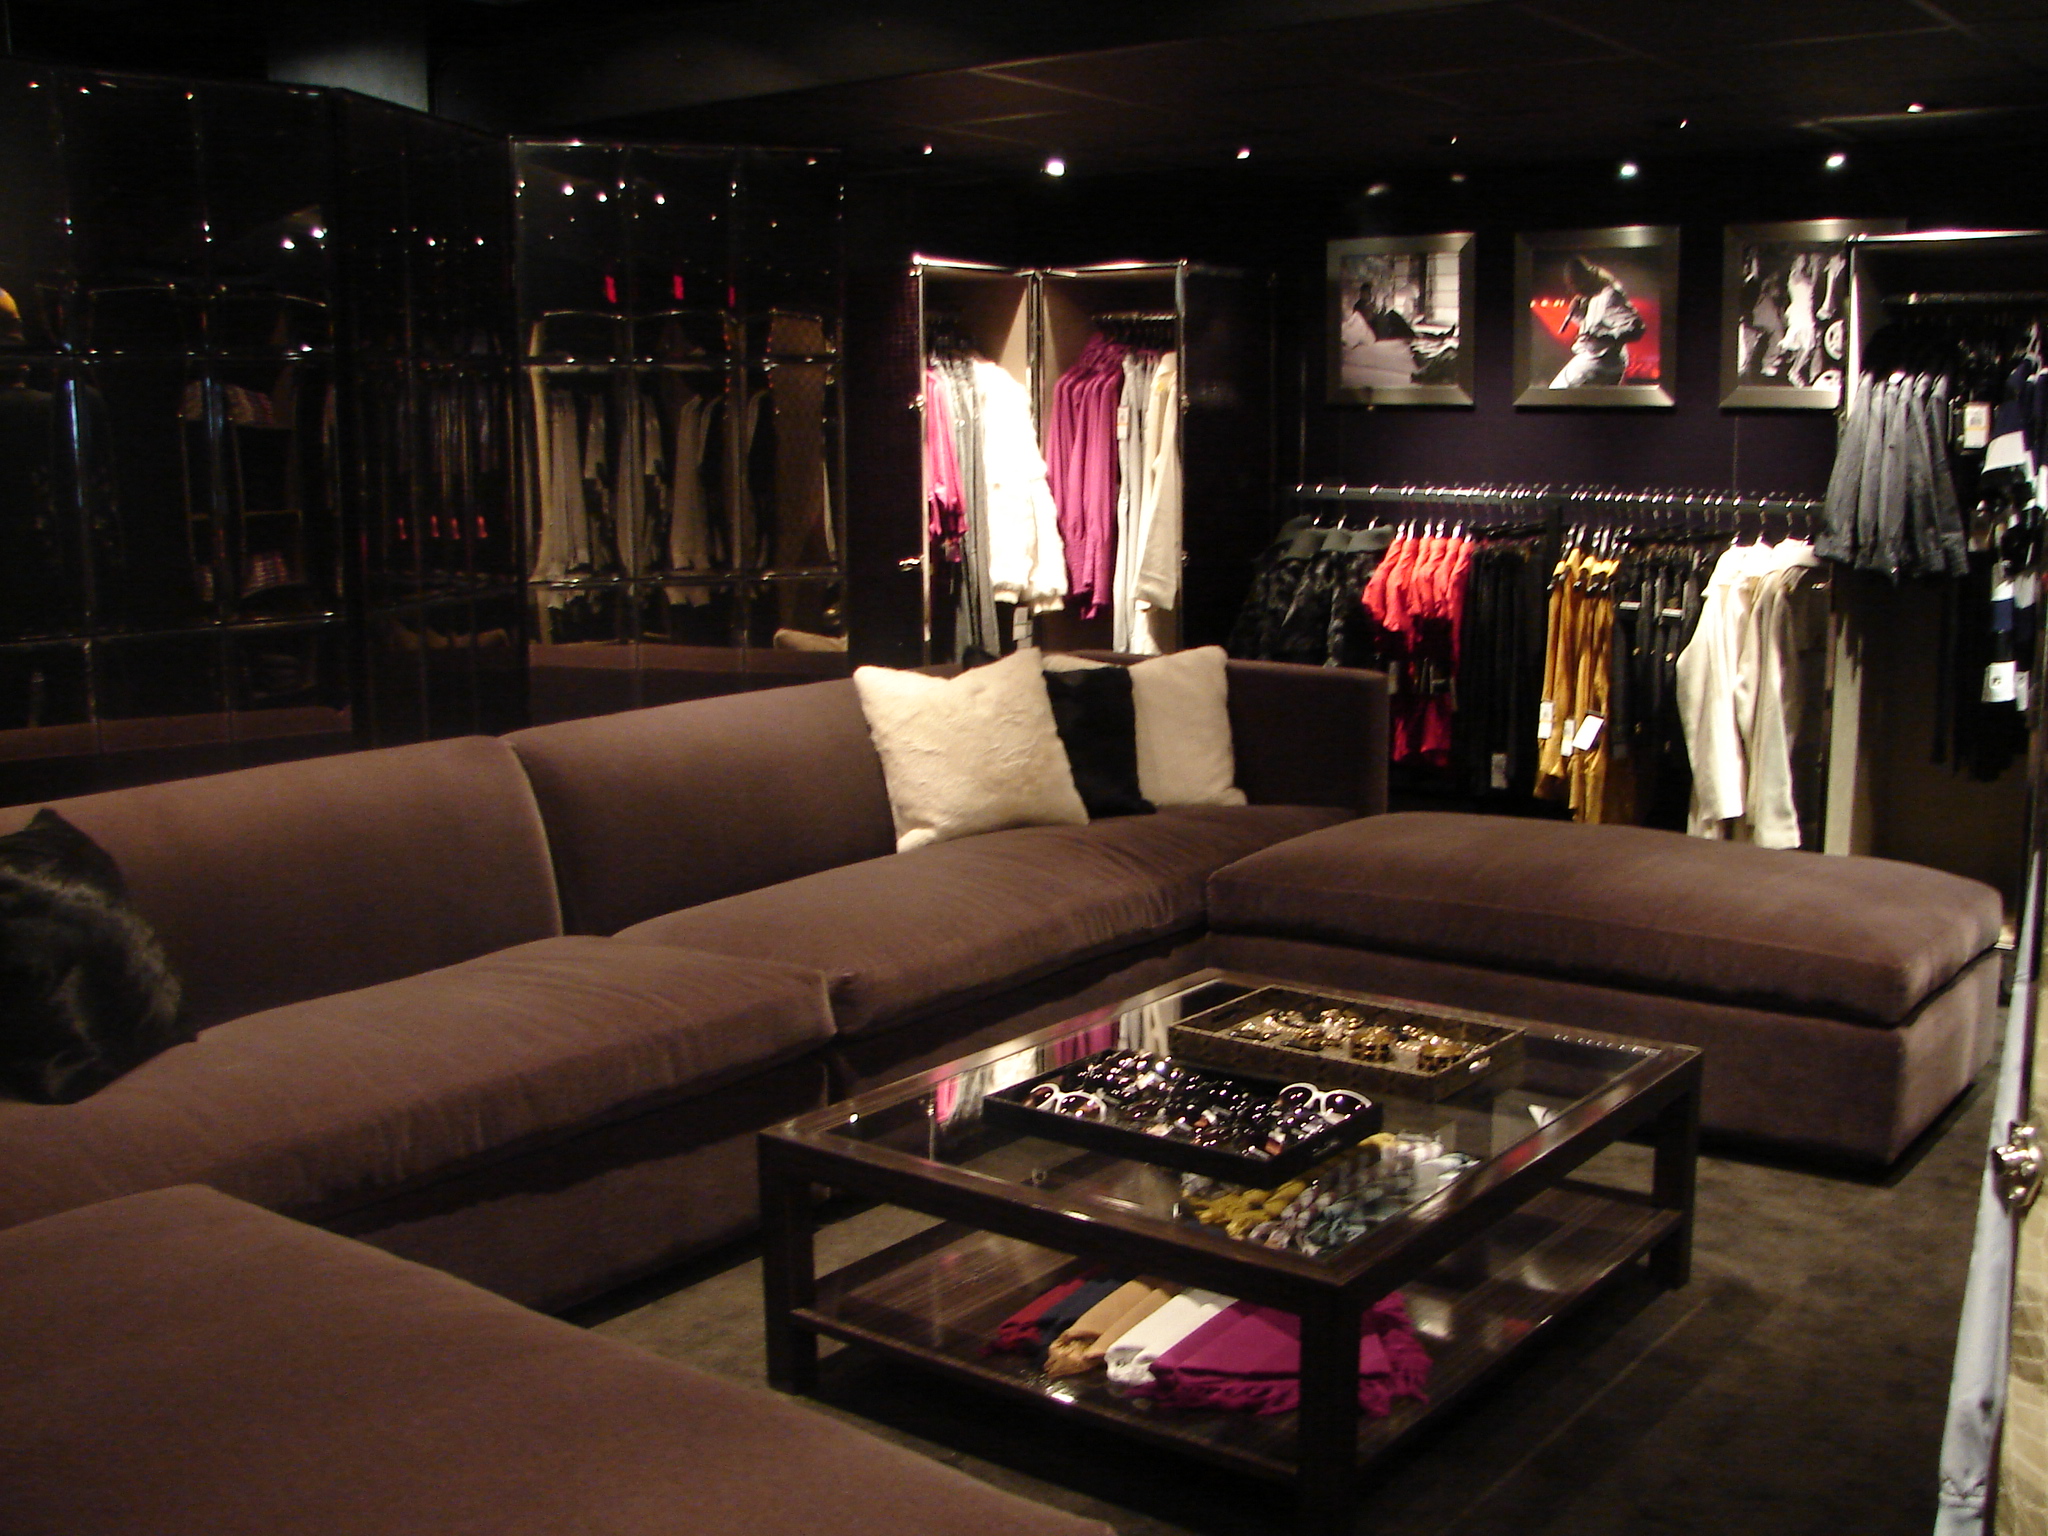 Inside the RocPopShop, guests can enjoy a unique VIP shopping and lounge experience.